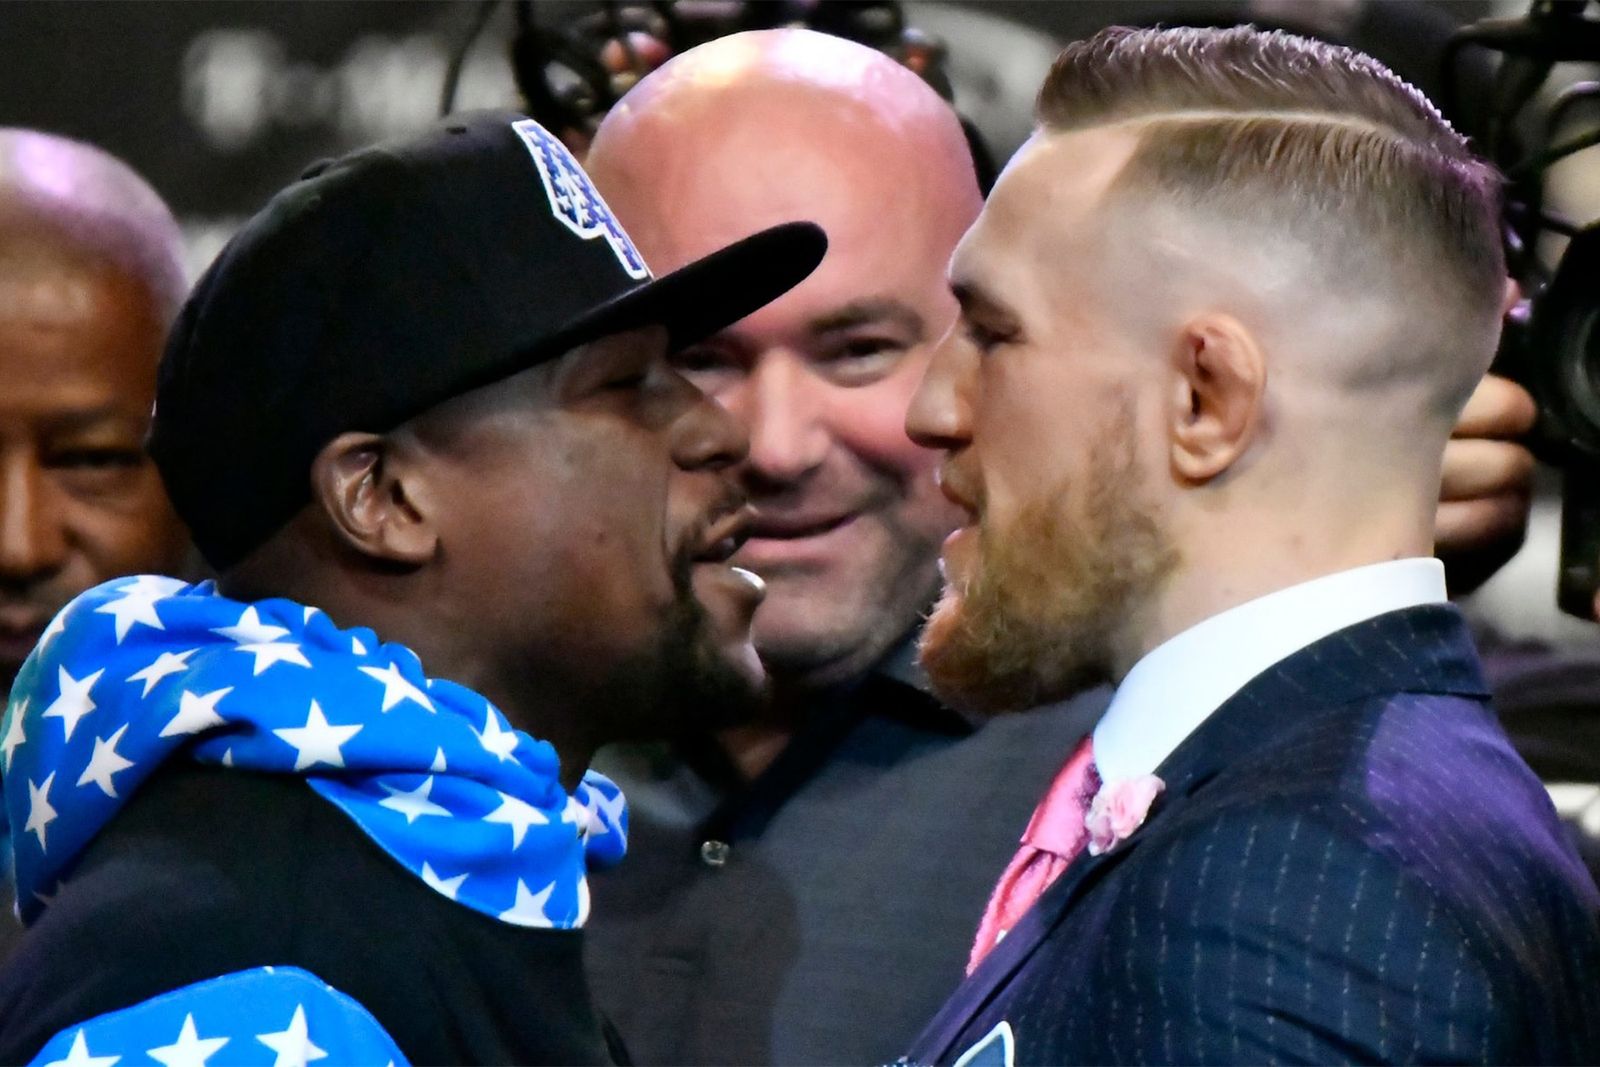 Floyd Mayweather Jr vs Conor McGregor When is it and where can I watch it image 1